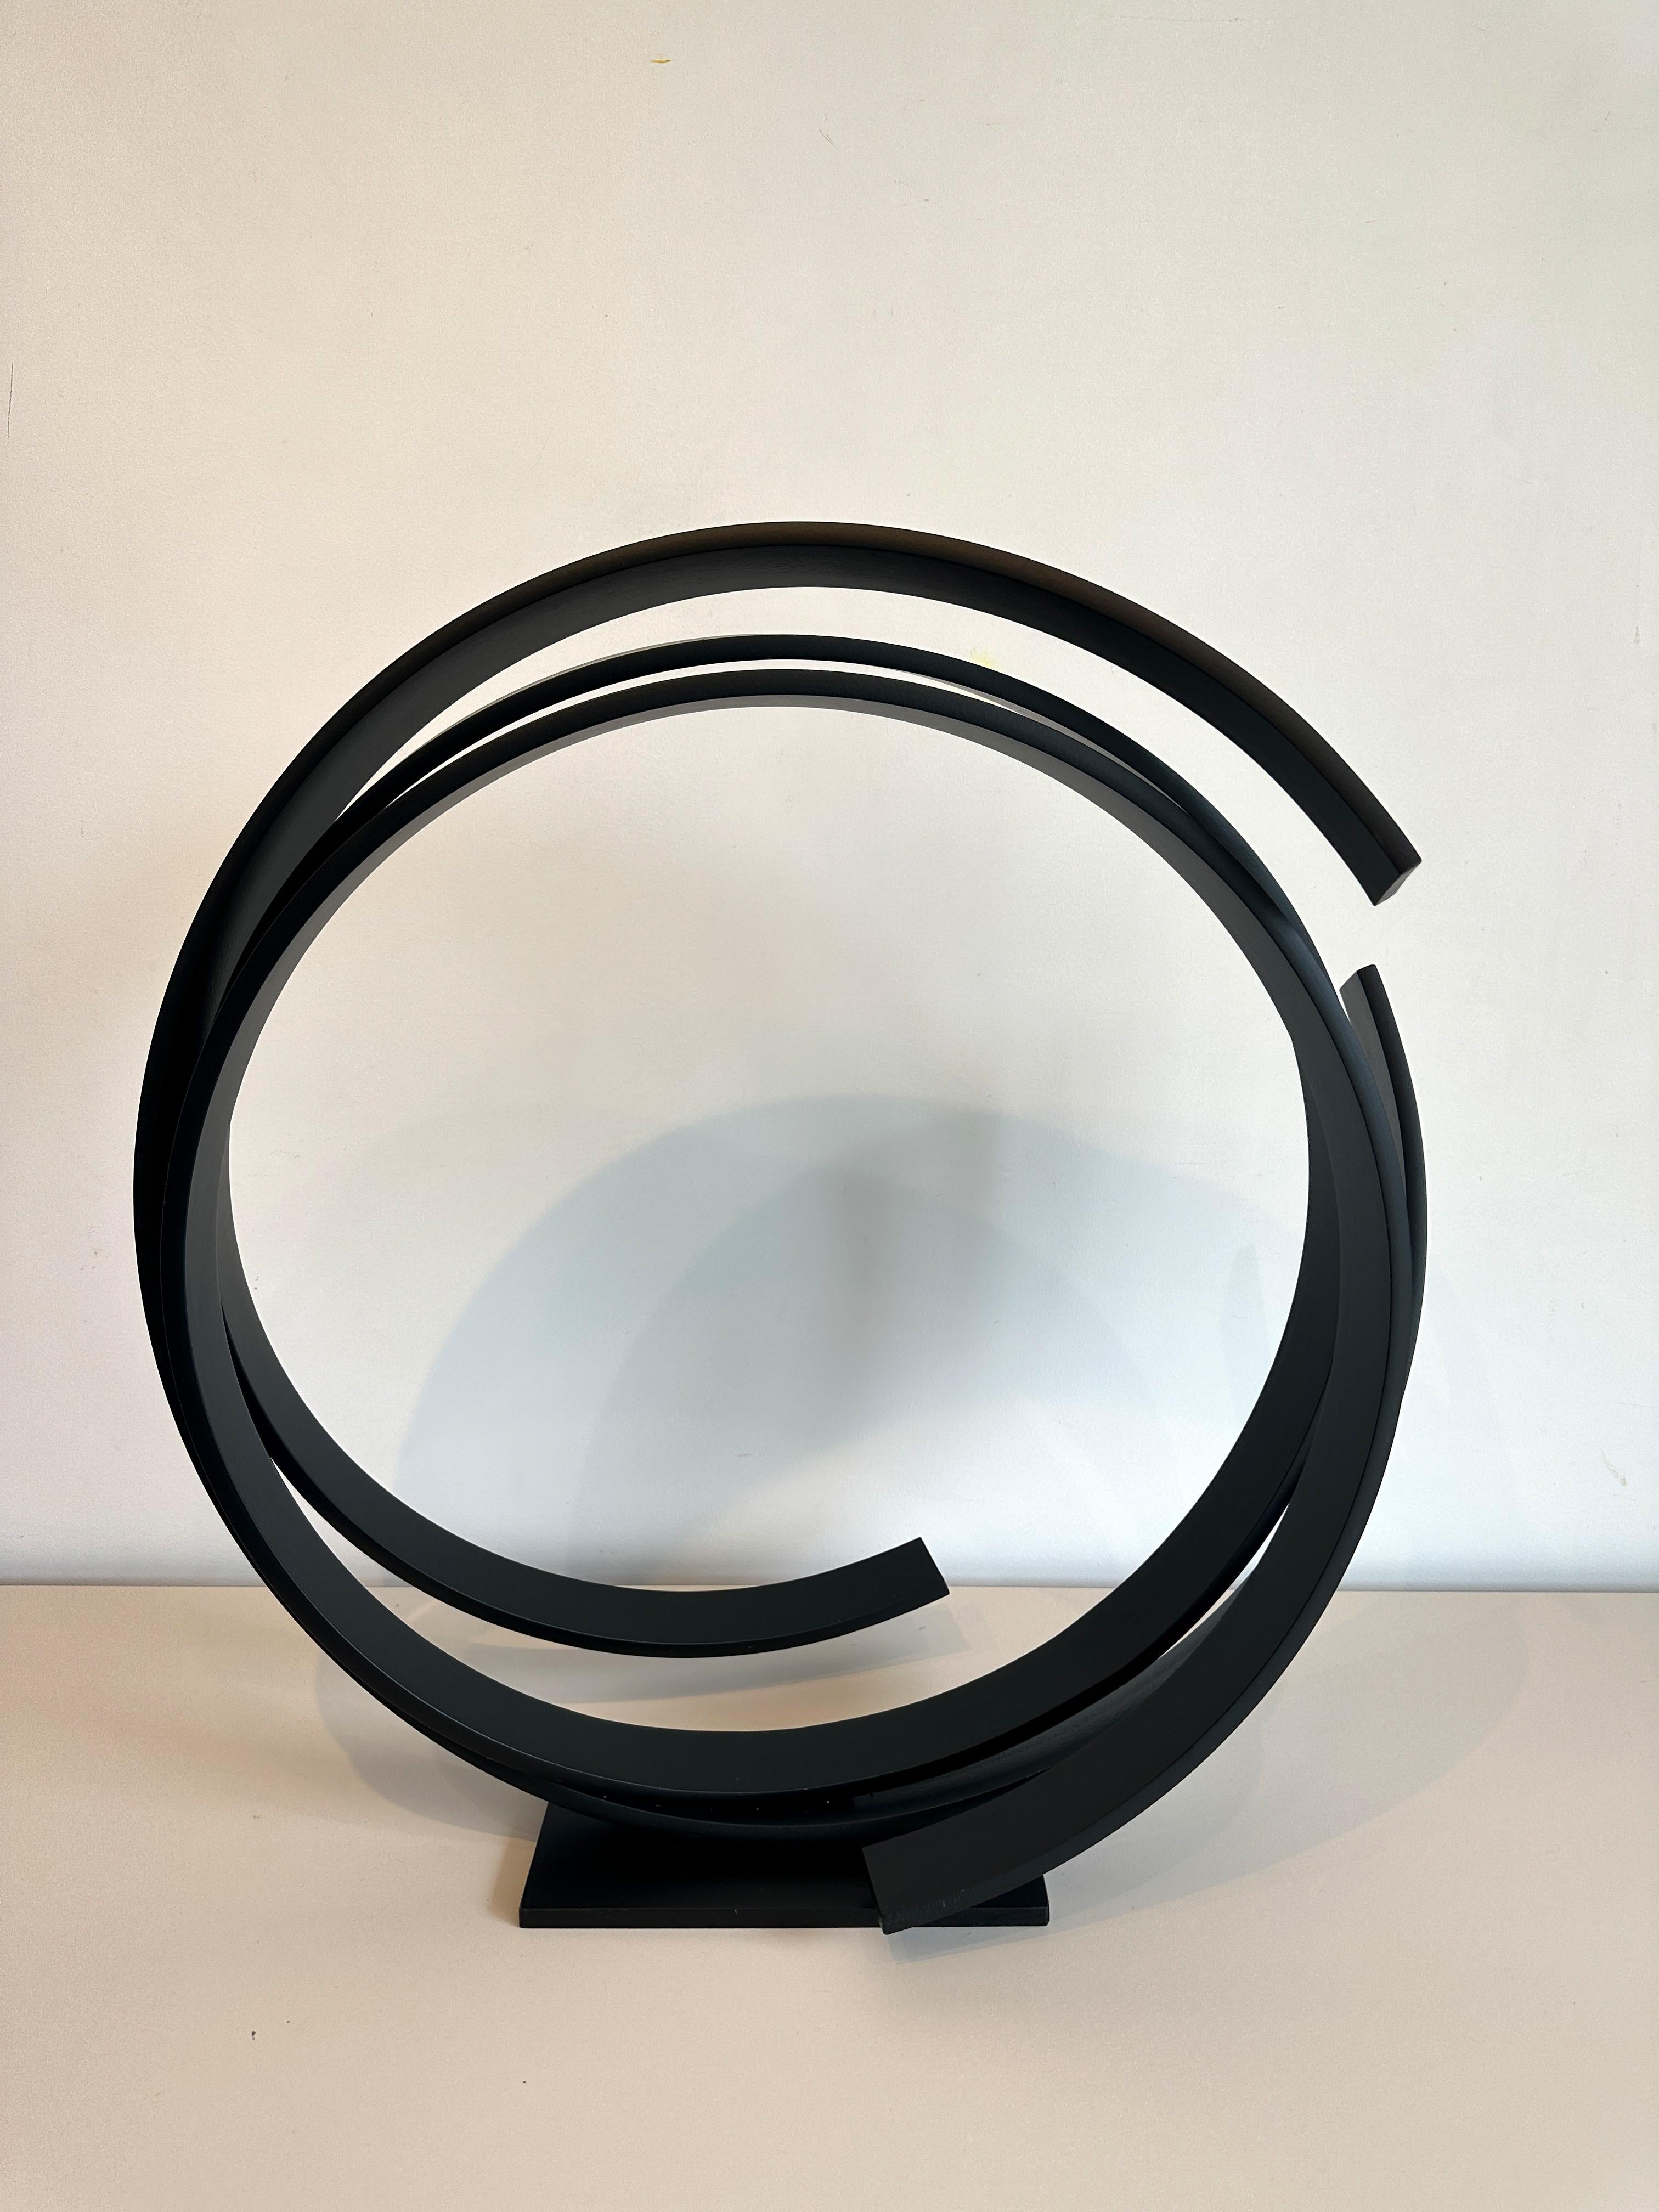 A large contemporary black powder coated steel sculpture. Beautiful on the floor or a pedestal. 
A contemporary statement piece full of elegance and movement.
_______________________________________________________________________

Born in 1951 in